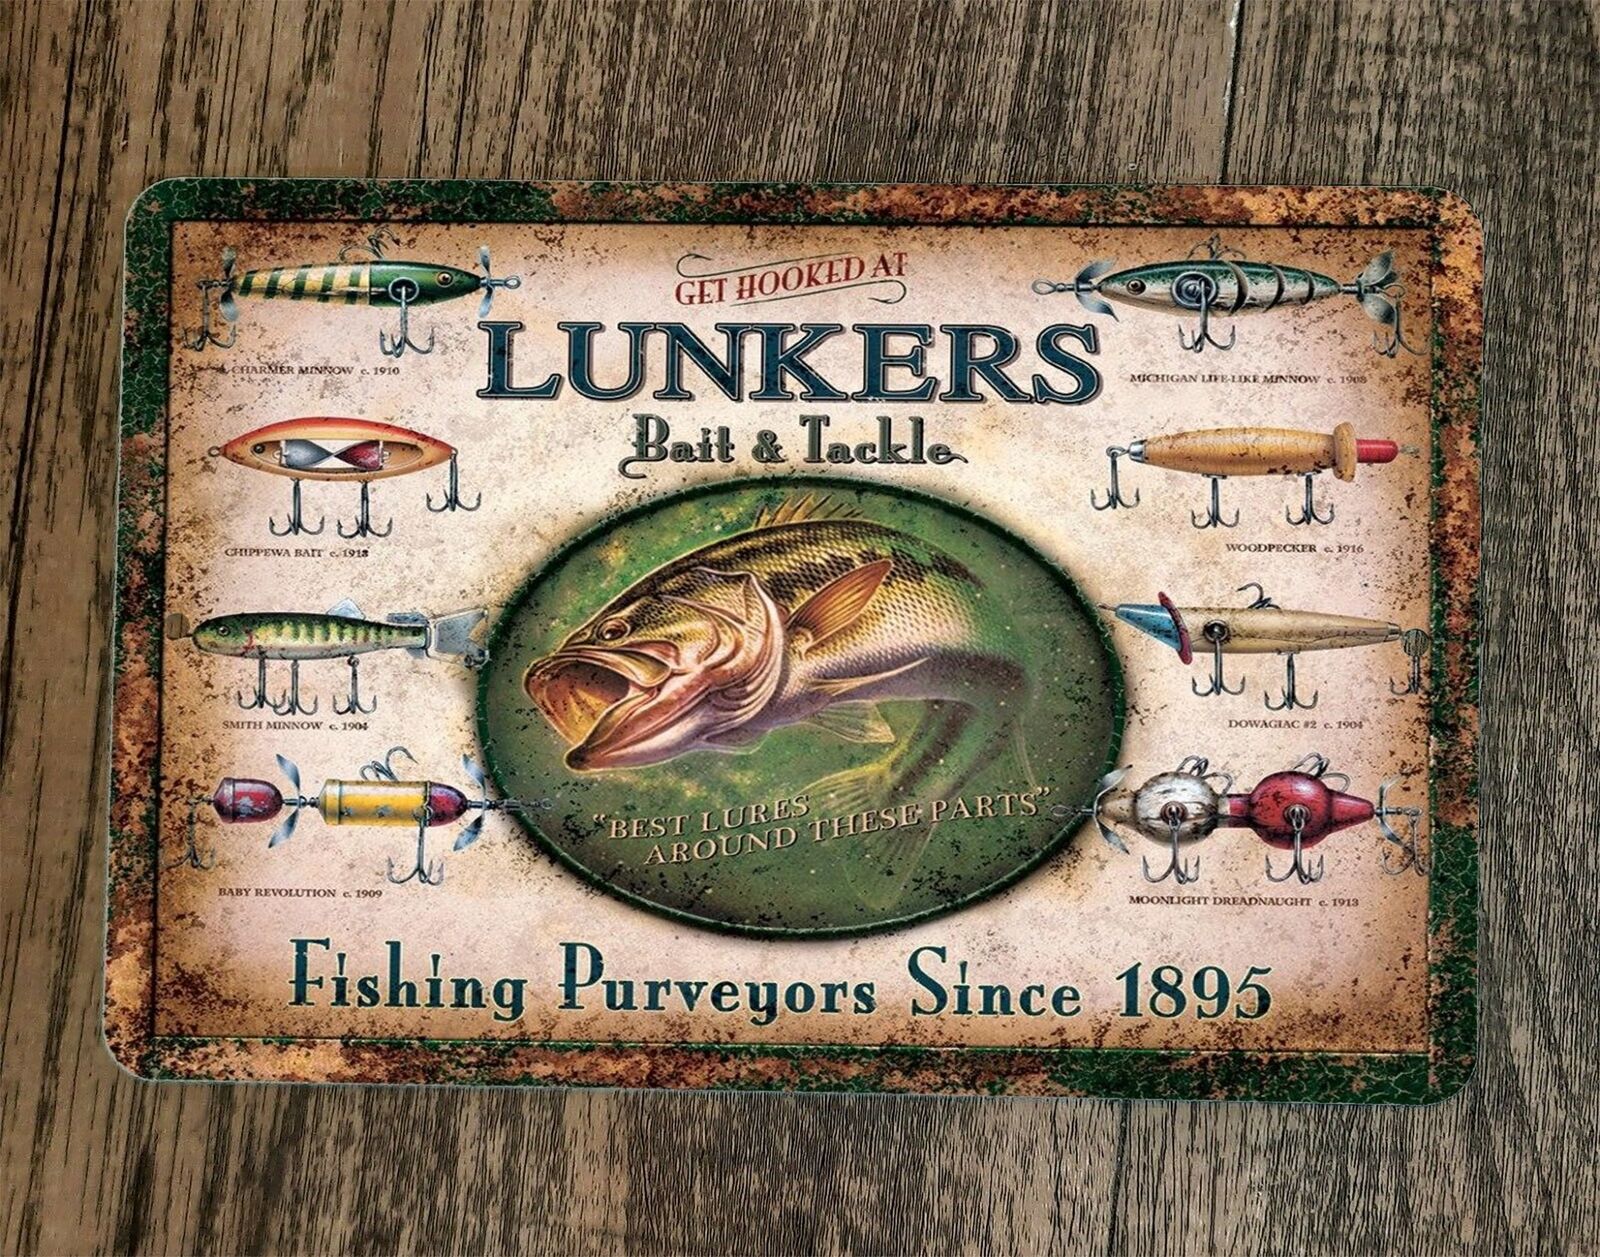 Fishing Purveyors Since 1895 Lunkers Bait and Tackle 8x12 Metal Wall S –  Sign Junky